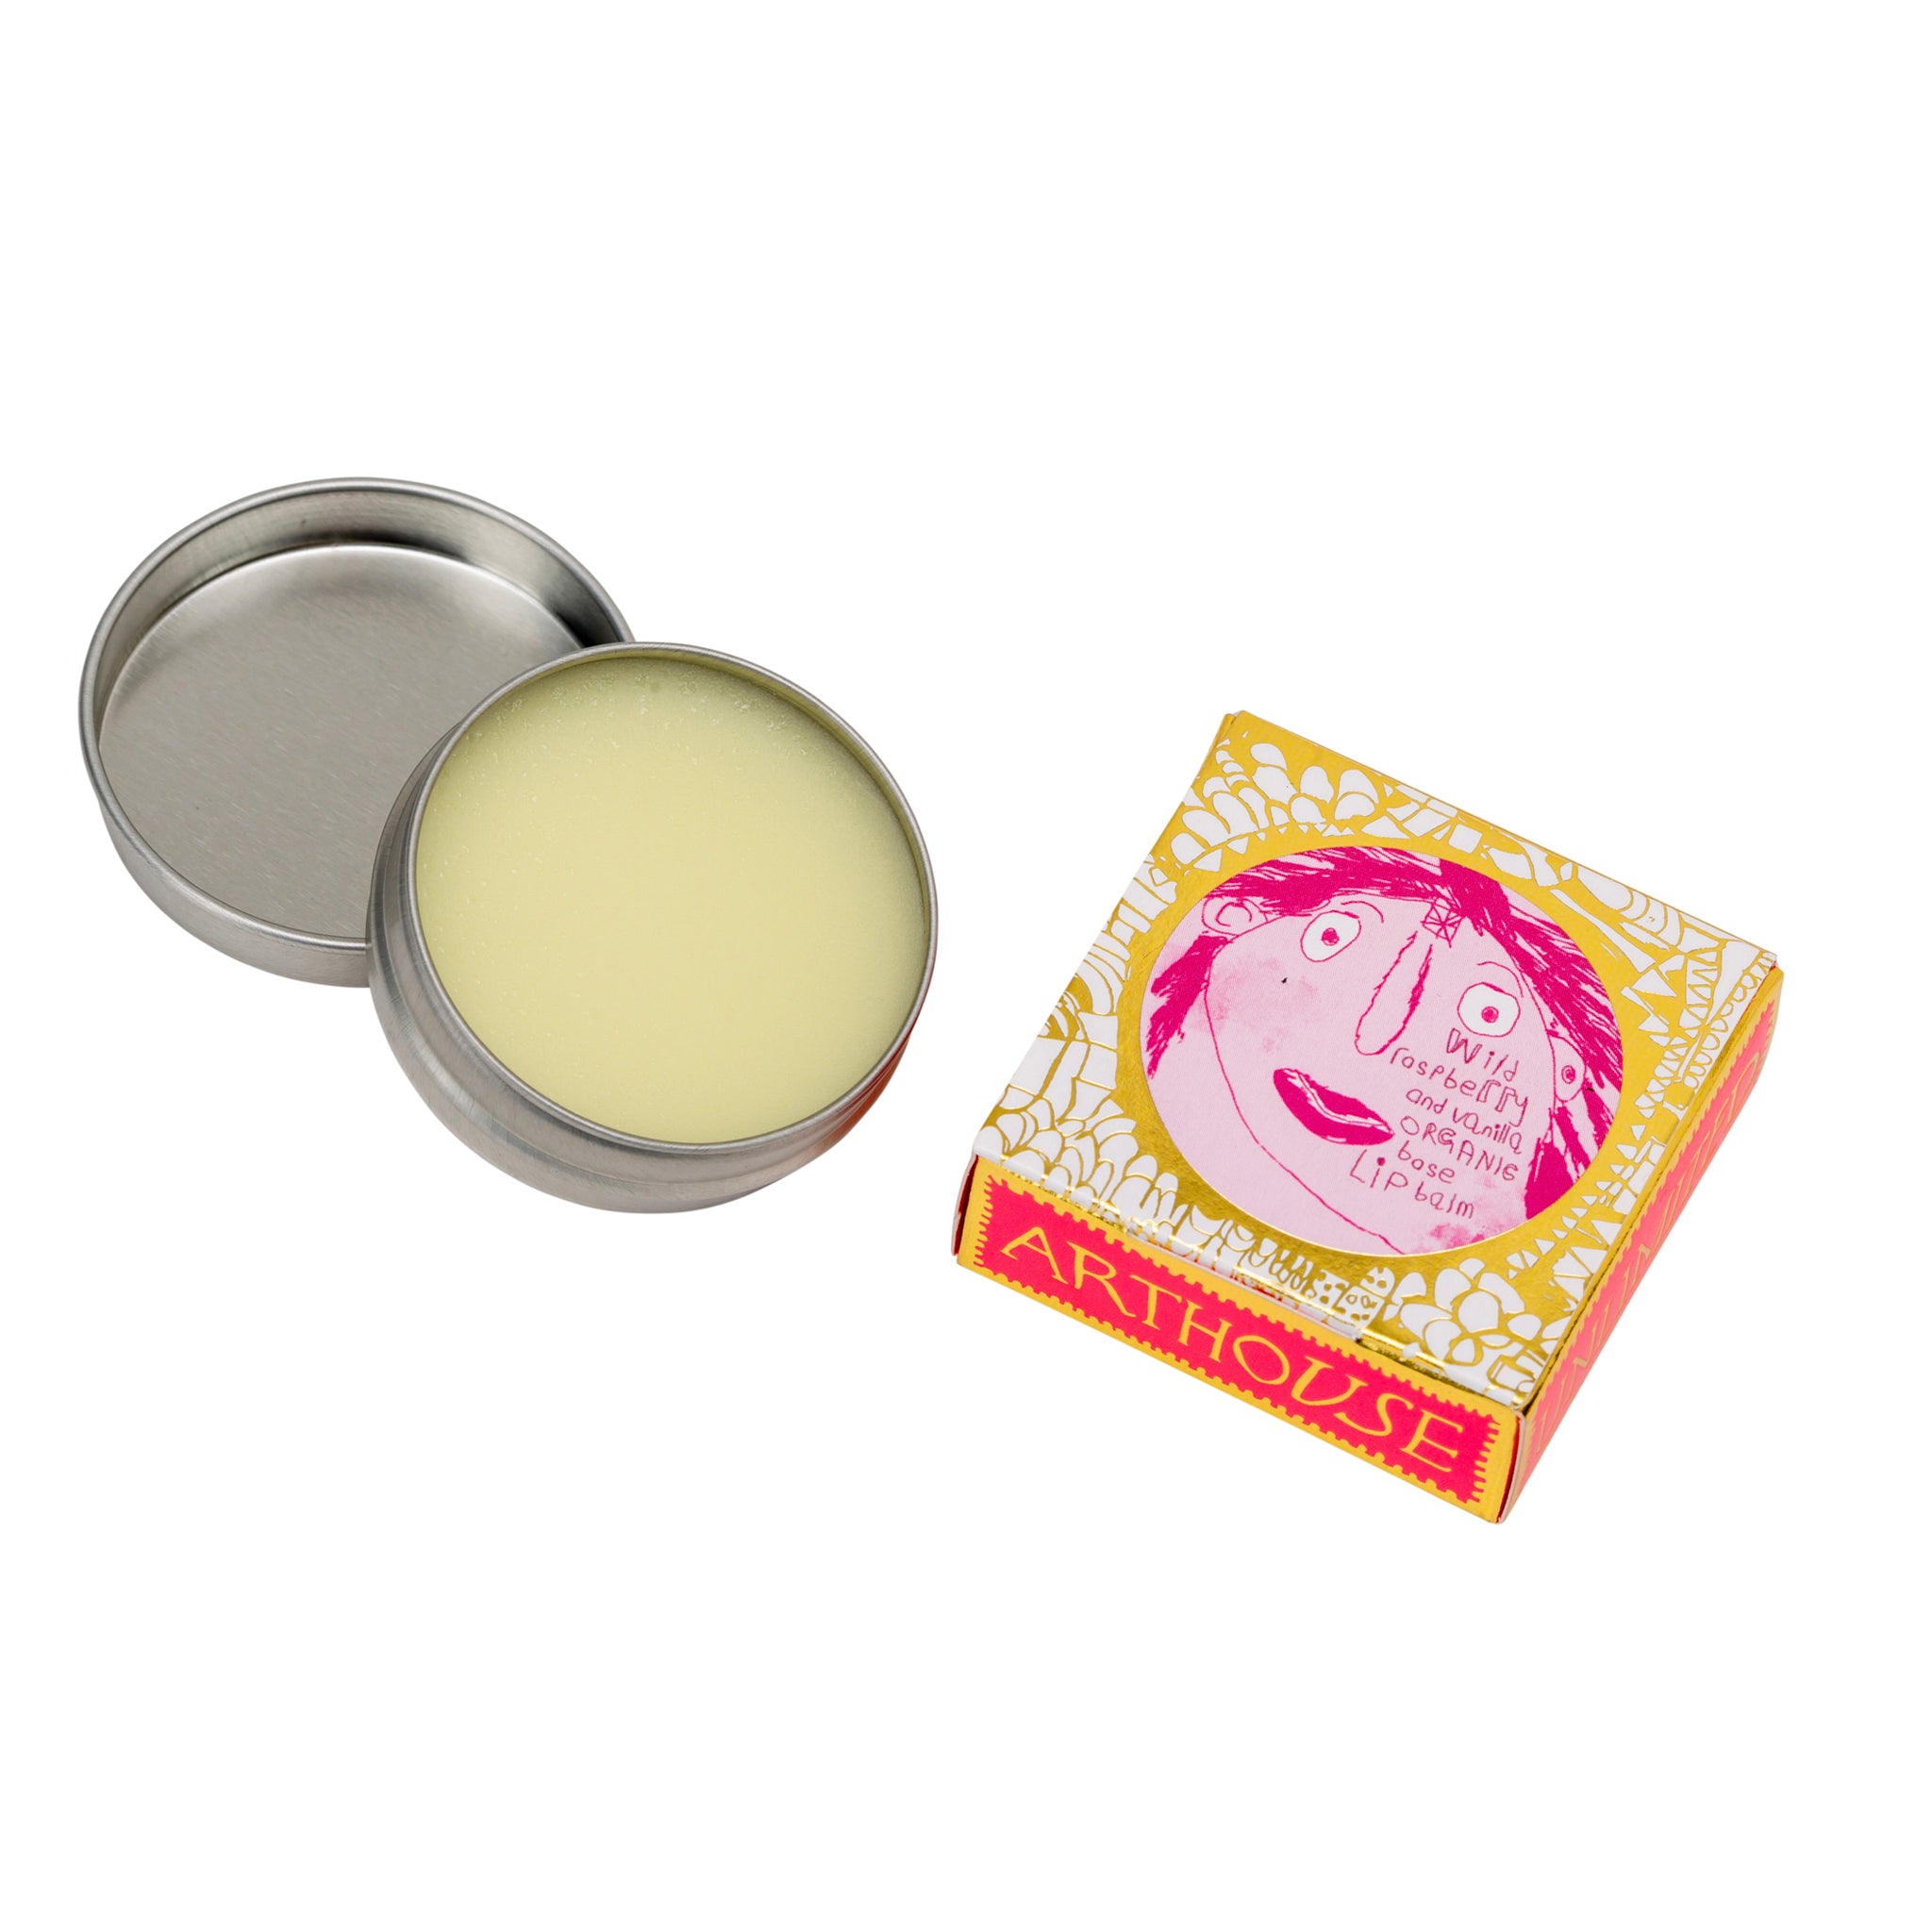 Pink and gold box containing Lady Muck, Lip Balm, Wild Raspberry & Vanilla with tin of open lip balm next to it